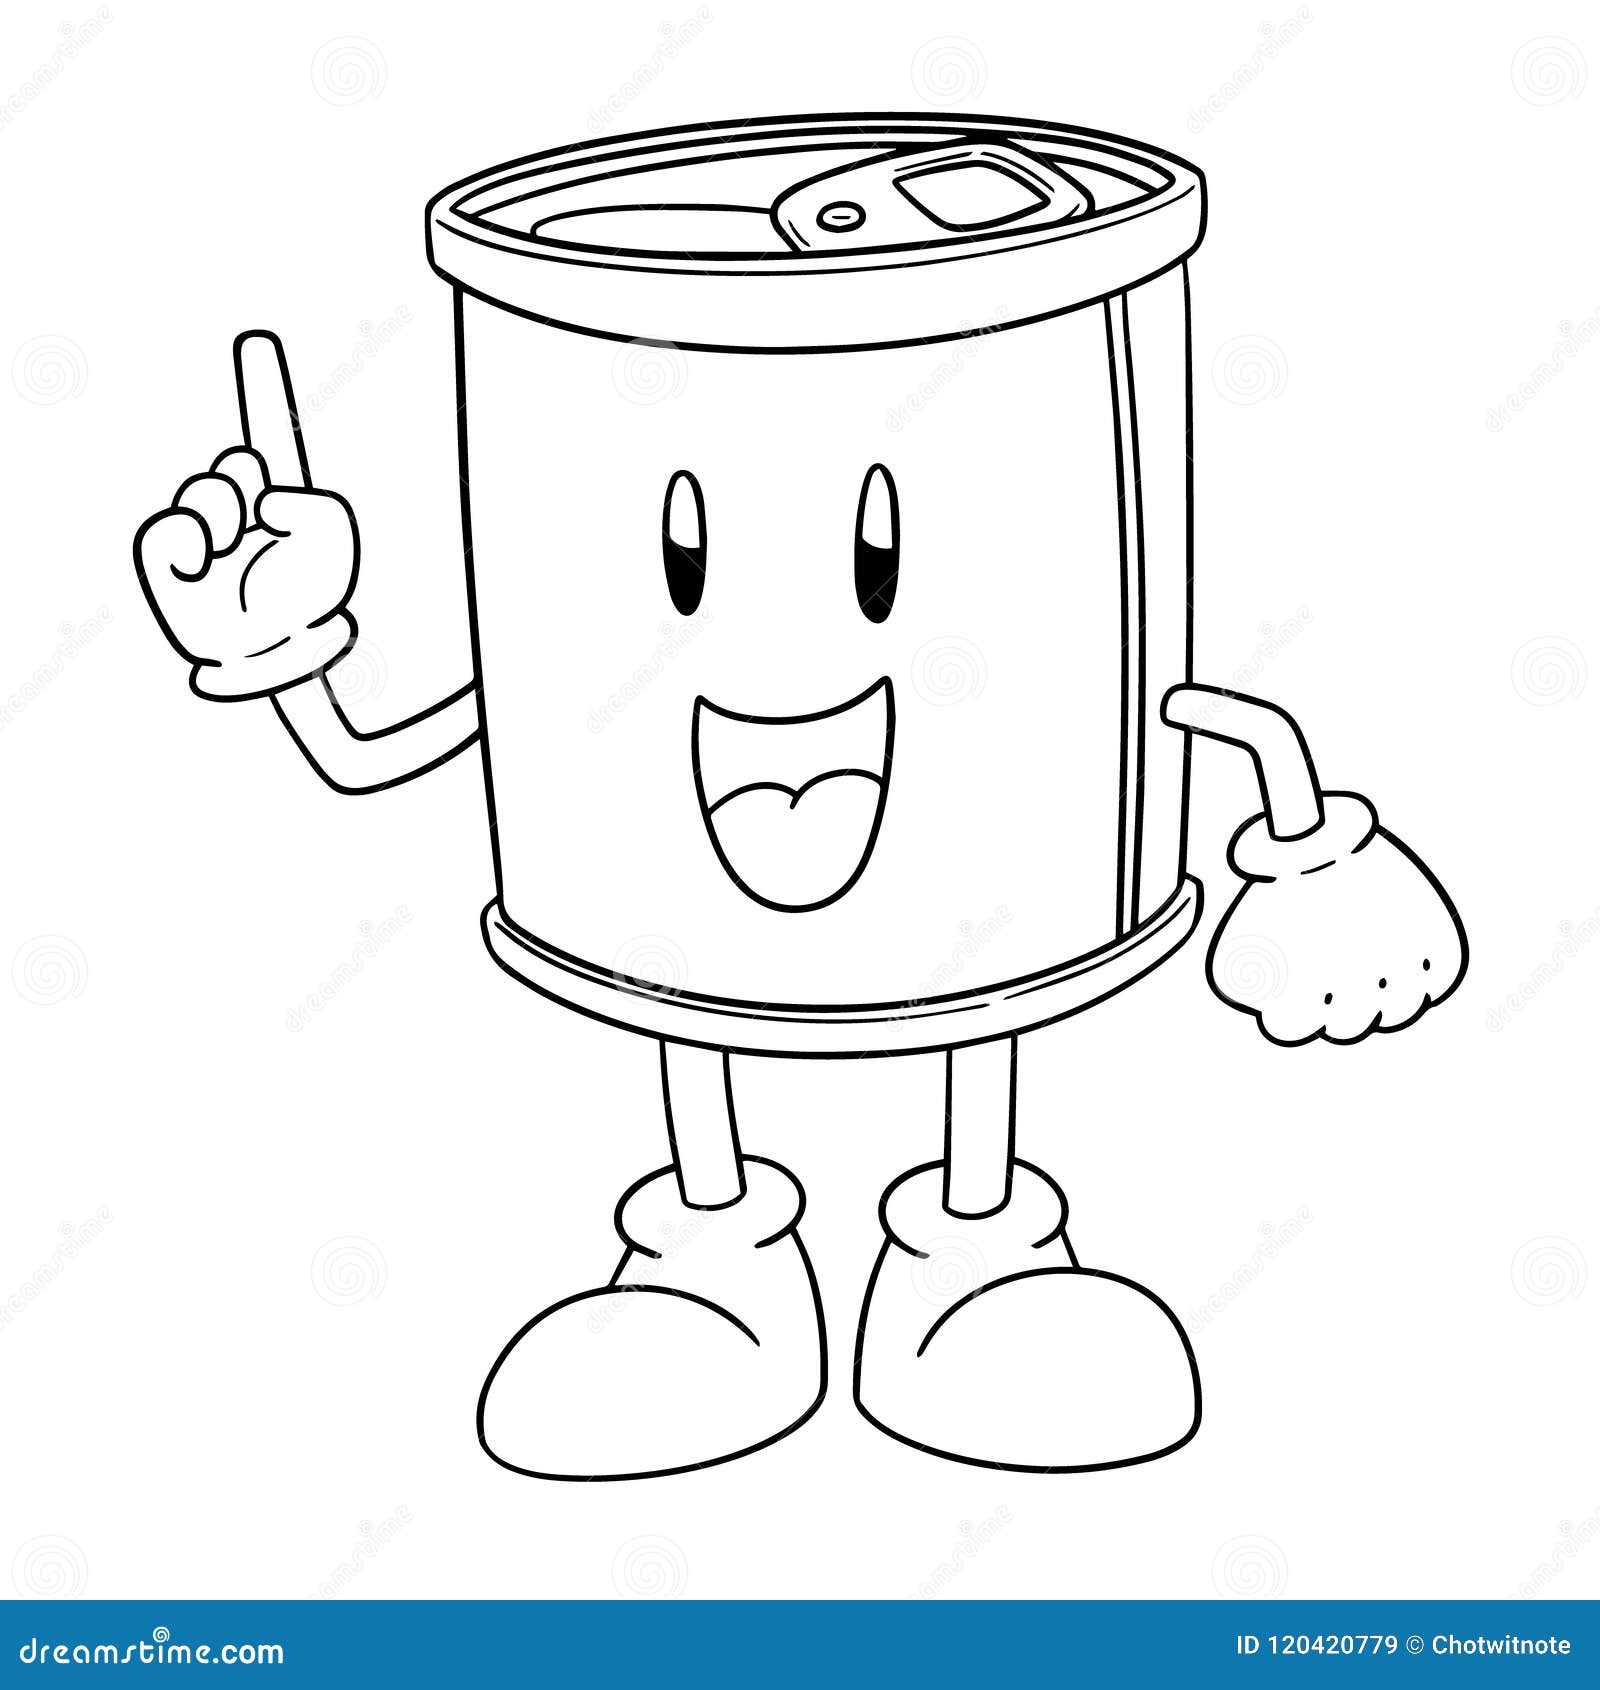 Vector of can cartoon stock vector. Illustration of ring - 120420779